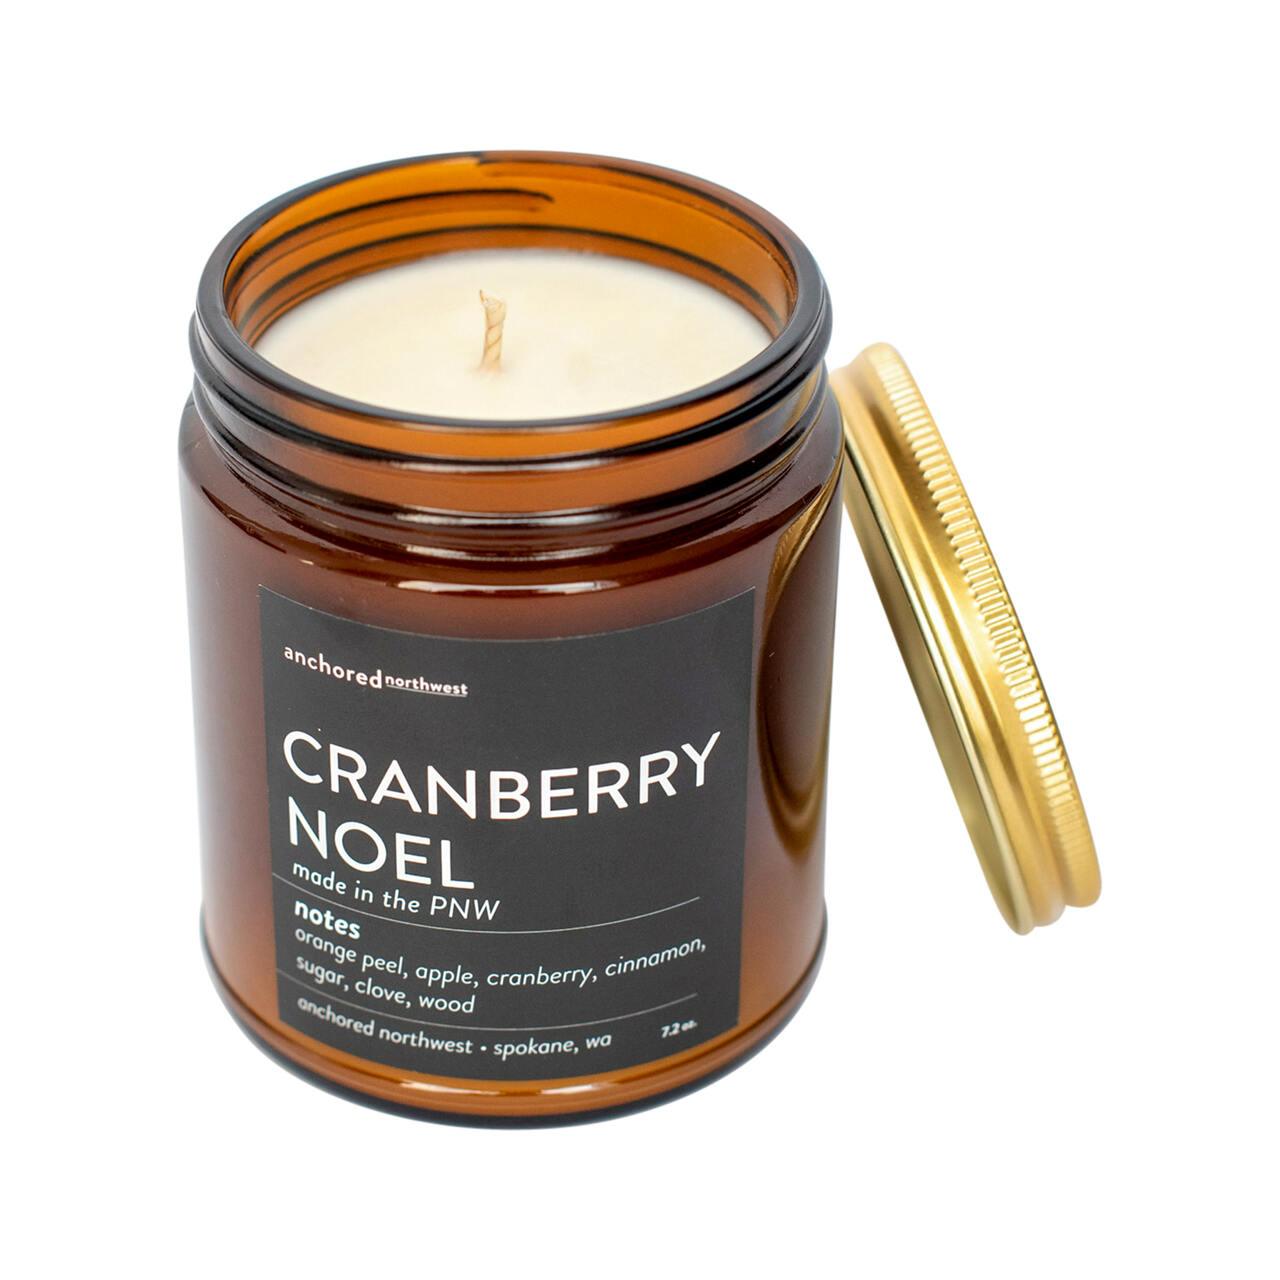 Cranberry Noel Amber Tumbler Candle by Anchored Northwest - parfumexquis